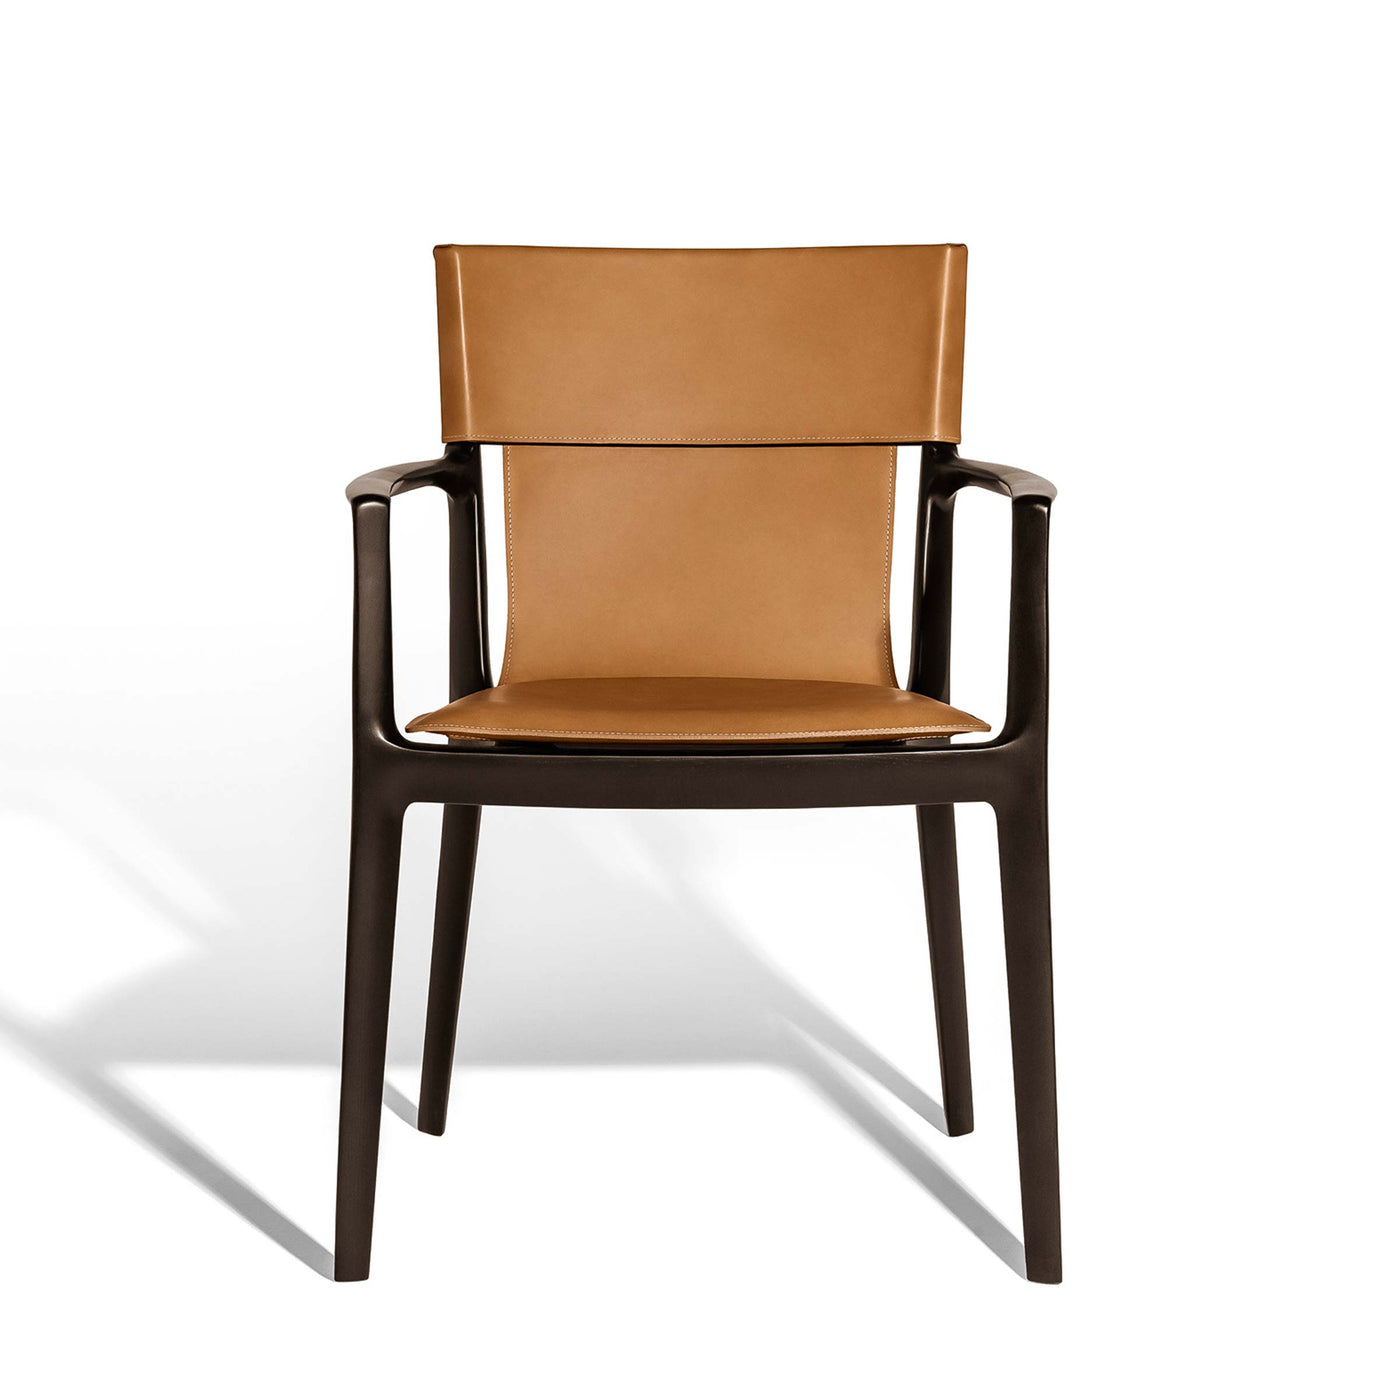 Leather Dining Chair ISADORA by Roberto Lazzeroni for Poltrona Frau 011